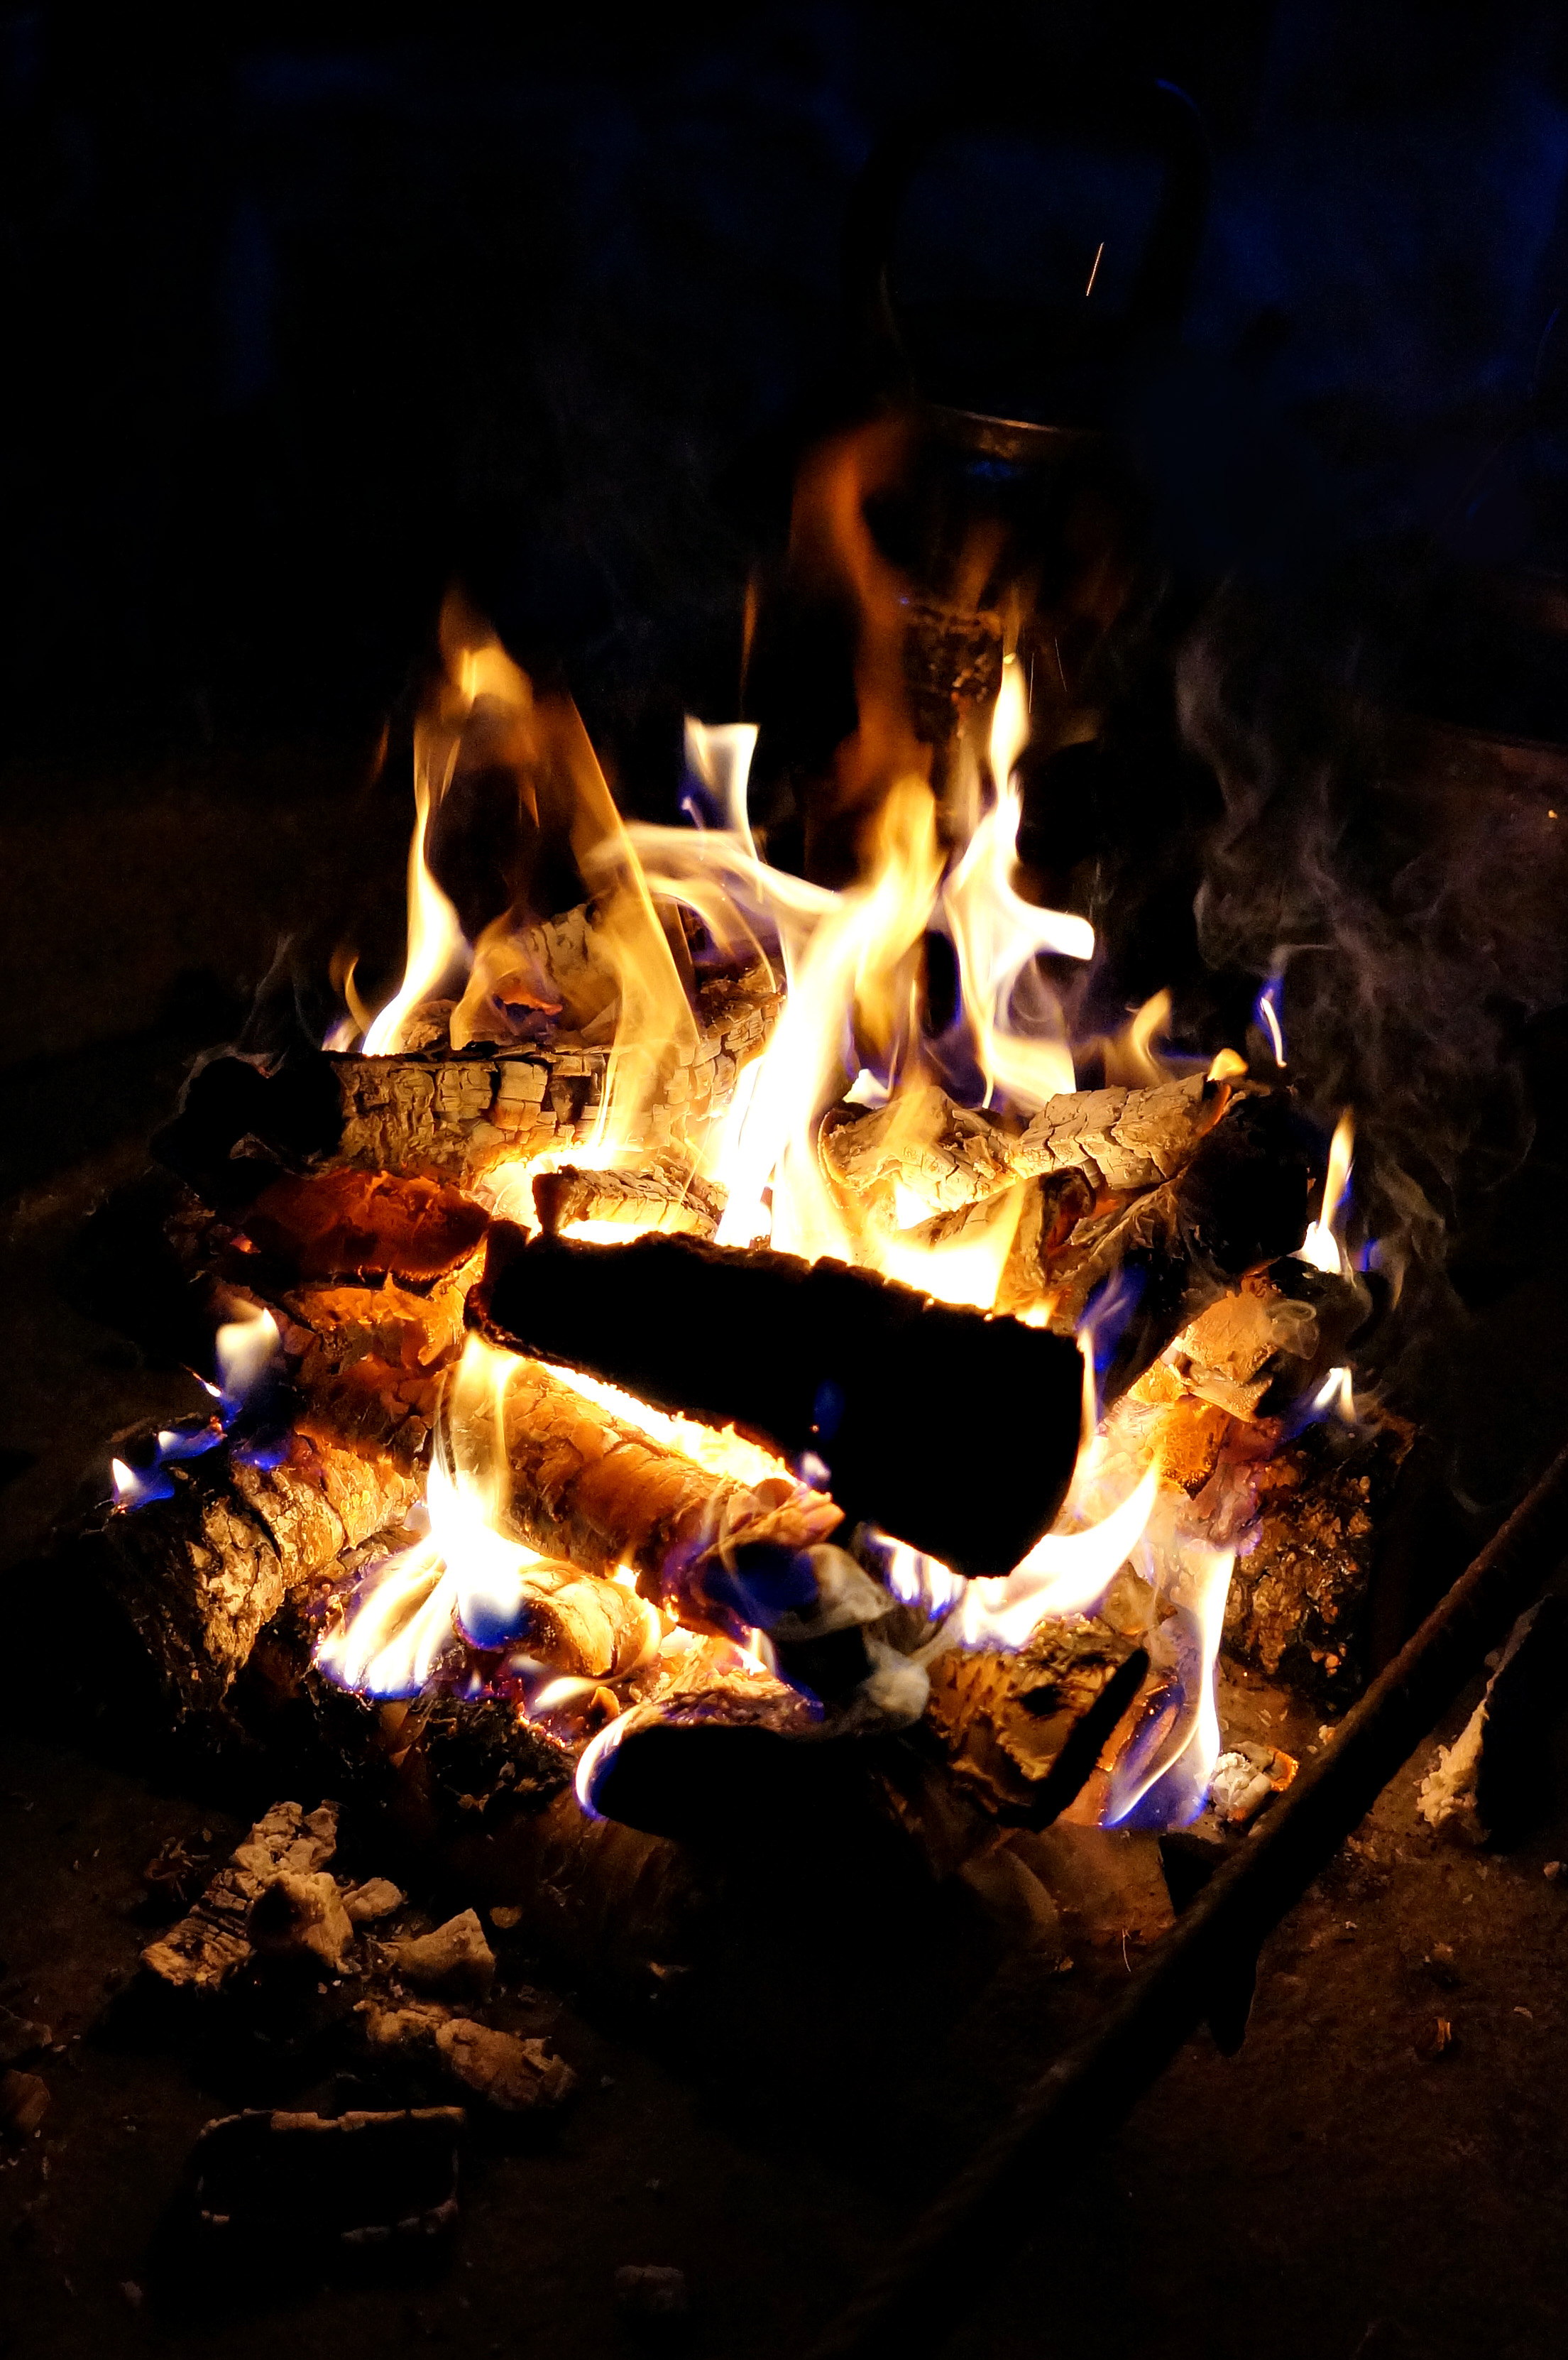 85925 Screensavers and Wallpapers Coals for phone. Download bonfire, coals, black, dark, flame, logs pictures for free